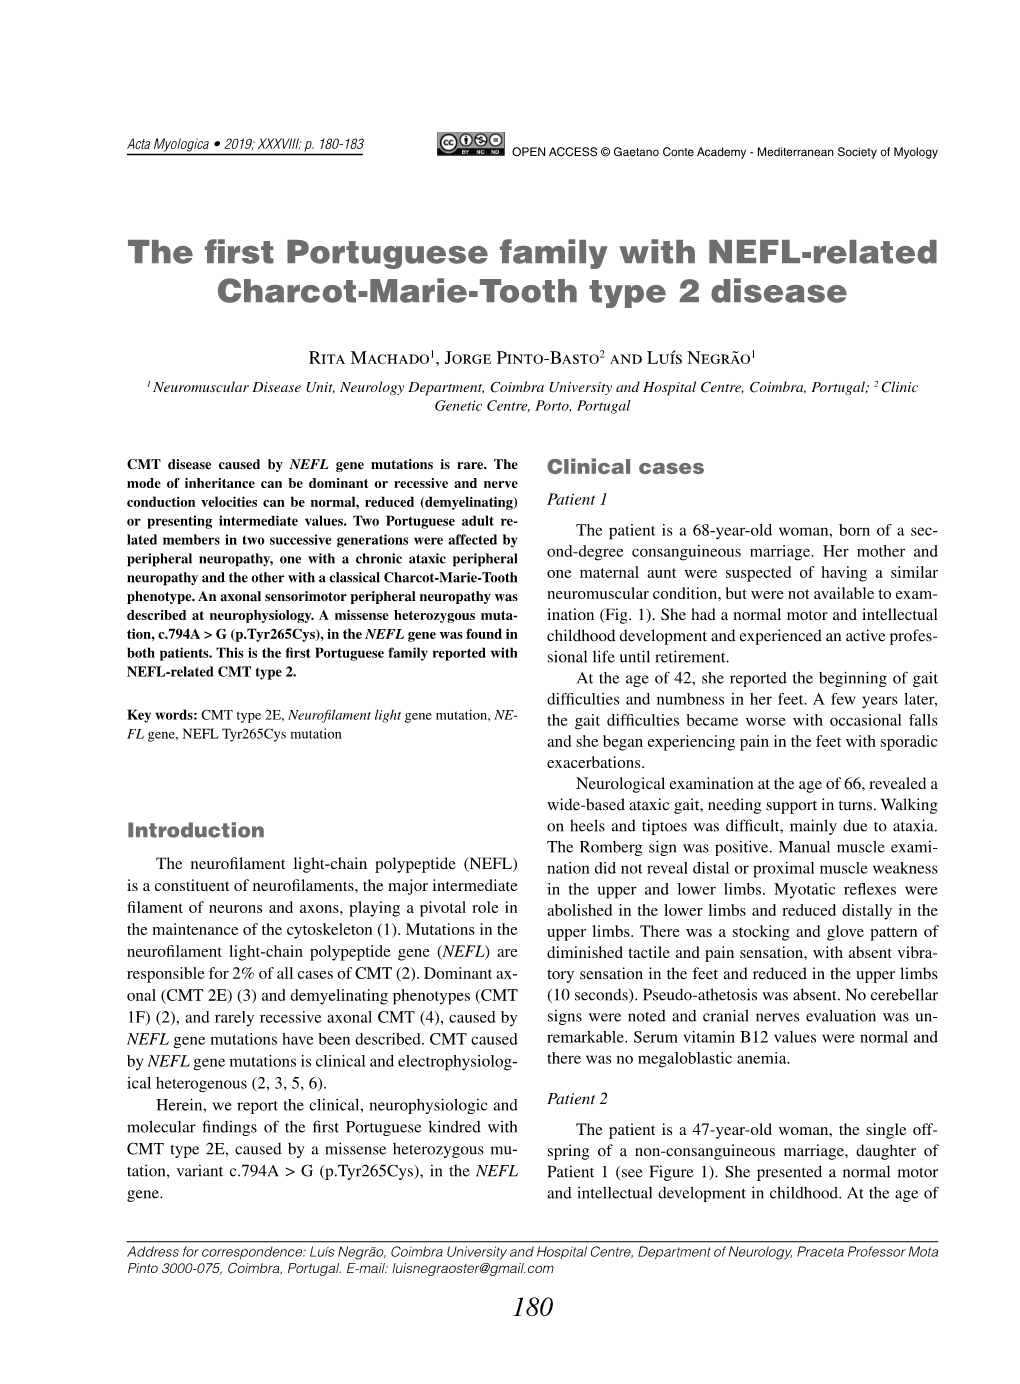 The First Portuguese Family with NEFL-Related Charcot-Marie-Tooth Type 2 Disease